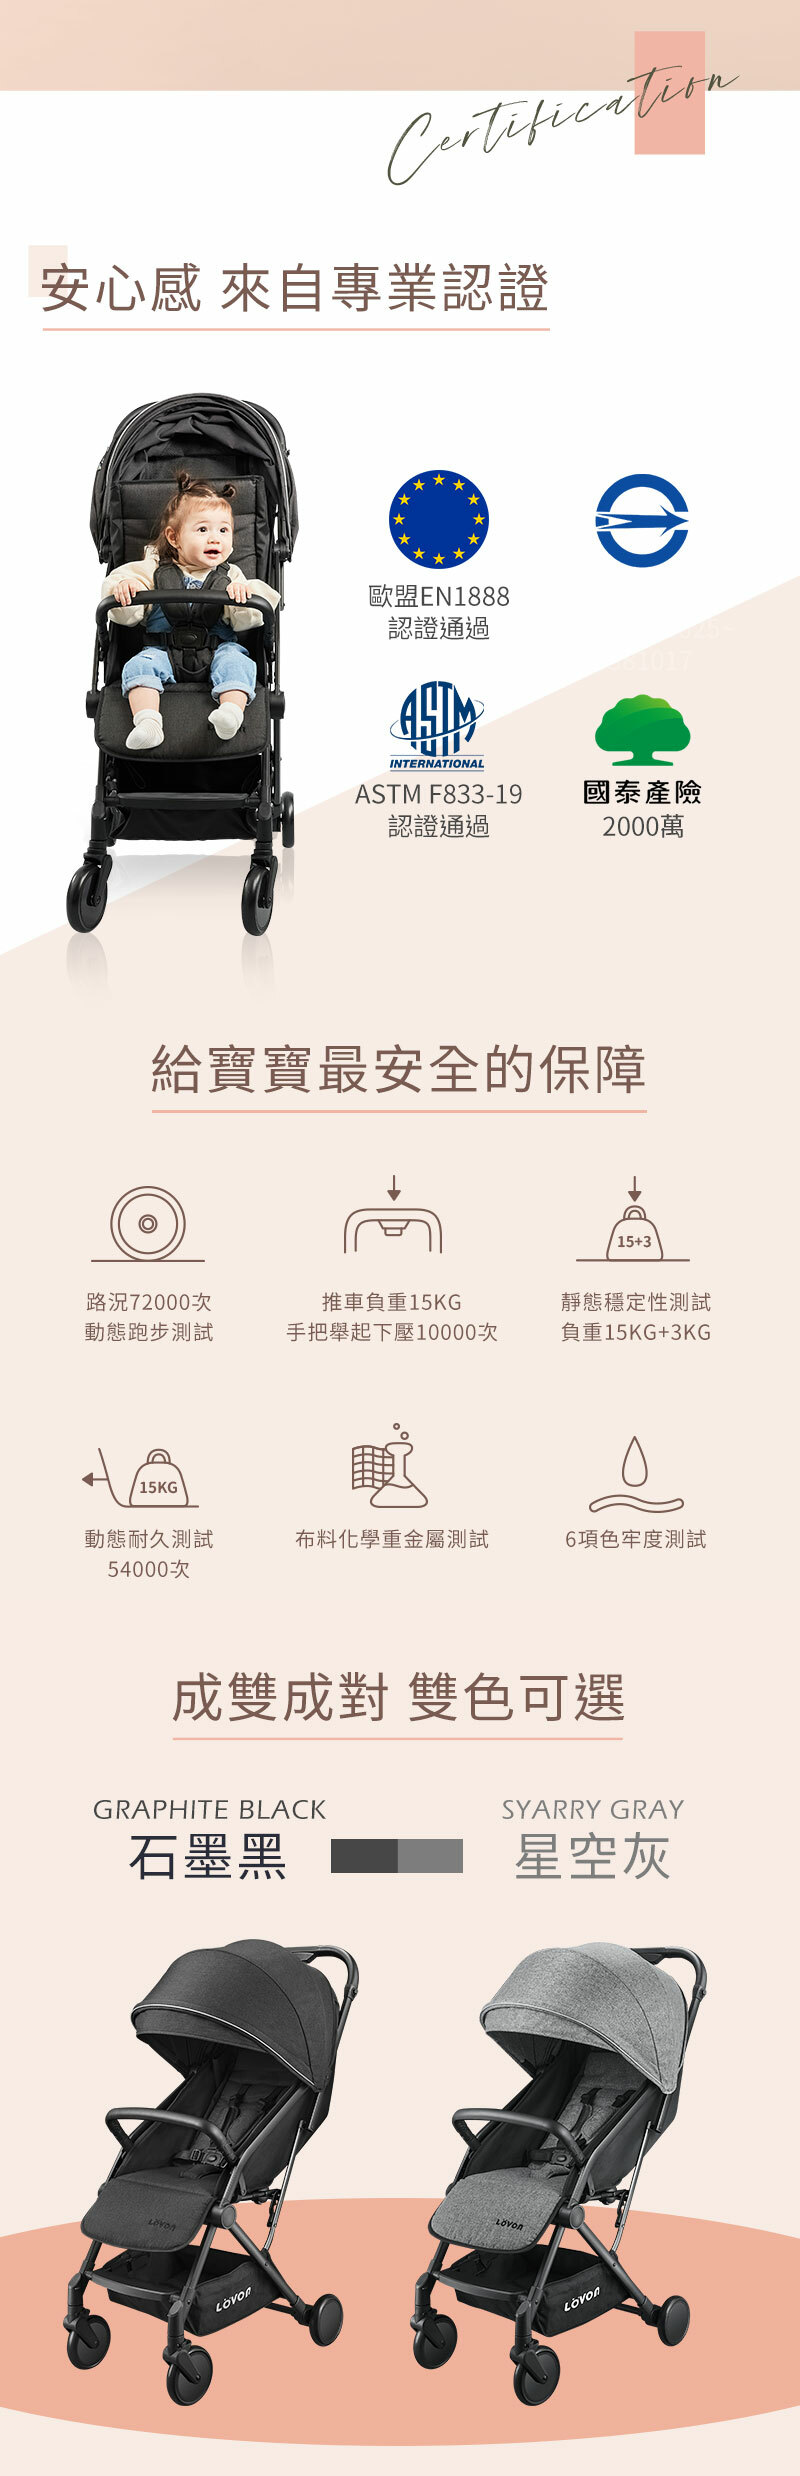 (Pre-ordering) [LOVON] GENIE V lightweight baby stroller-Milk Tea Brown (expected to arrive in mid-April)